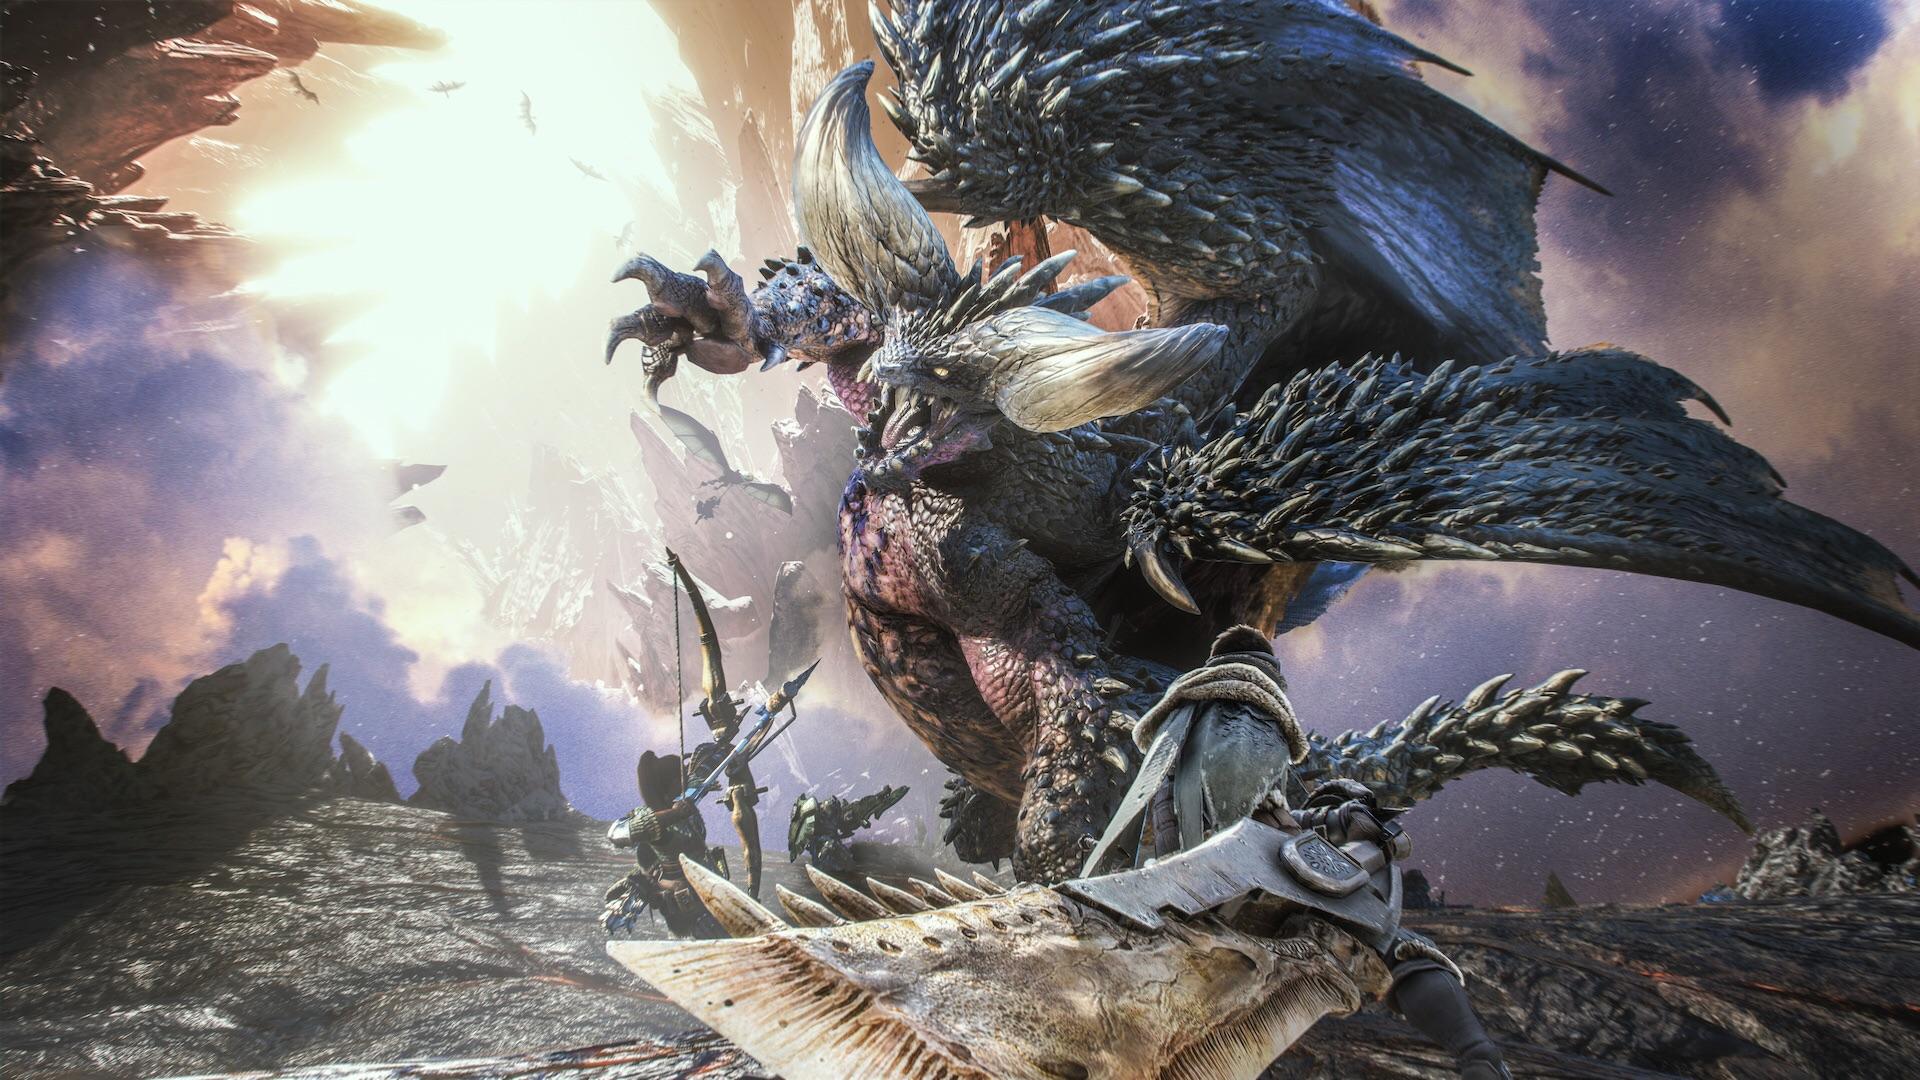 30 Hours as a Monster Hunter: First Impressions